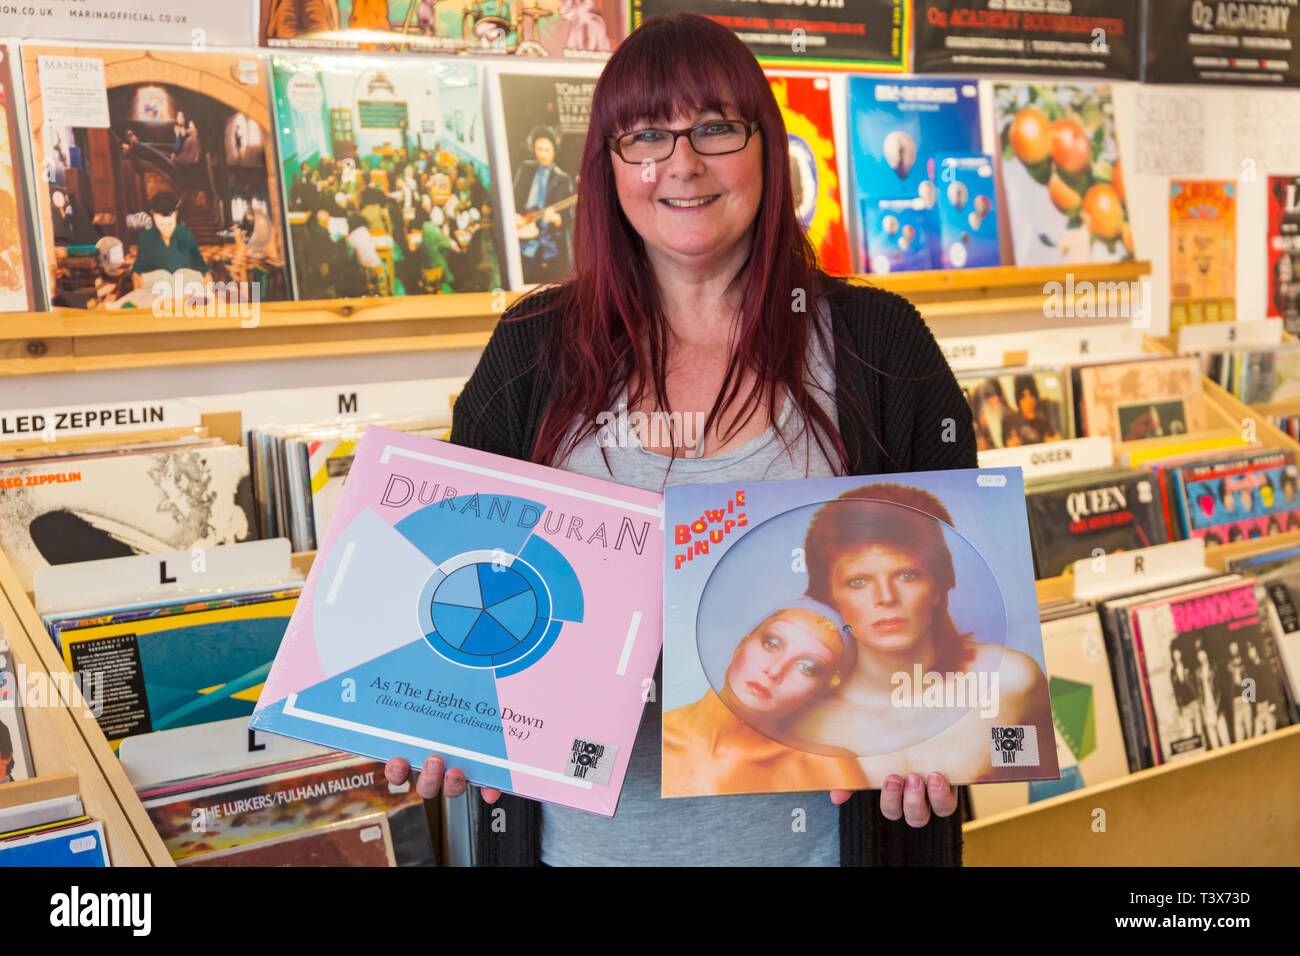 Bournemouth, Dorset, UK. 12th Apr 2019. The Vault record shop at Commercial Road, Bournemouth prepare for Record Store Day tomorrow, encouraging people to visit and support local record stores. The store opens at 8am with queues expected to access hundreds of limited editions from a wide range of artists, which they cannot save beforehand or preorder. The Legends like David Bowie and Queen who are no longer with us will be popular vinyls.  Chrissy holds up Bowie PinUps and Duran Duran As the Lights Go Down. Credit: Carolyn Jenkins/Alamy Live News Stock Photo